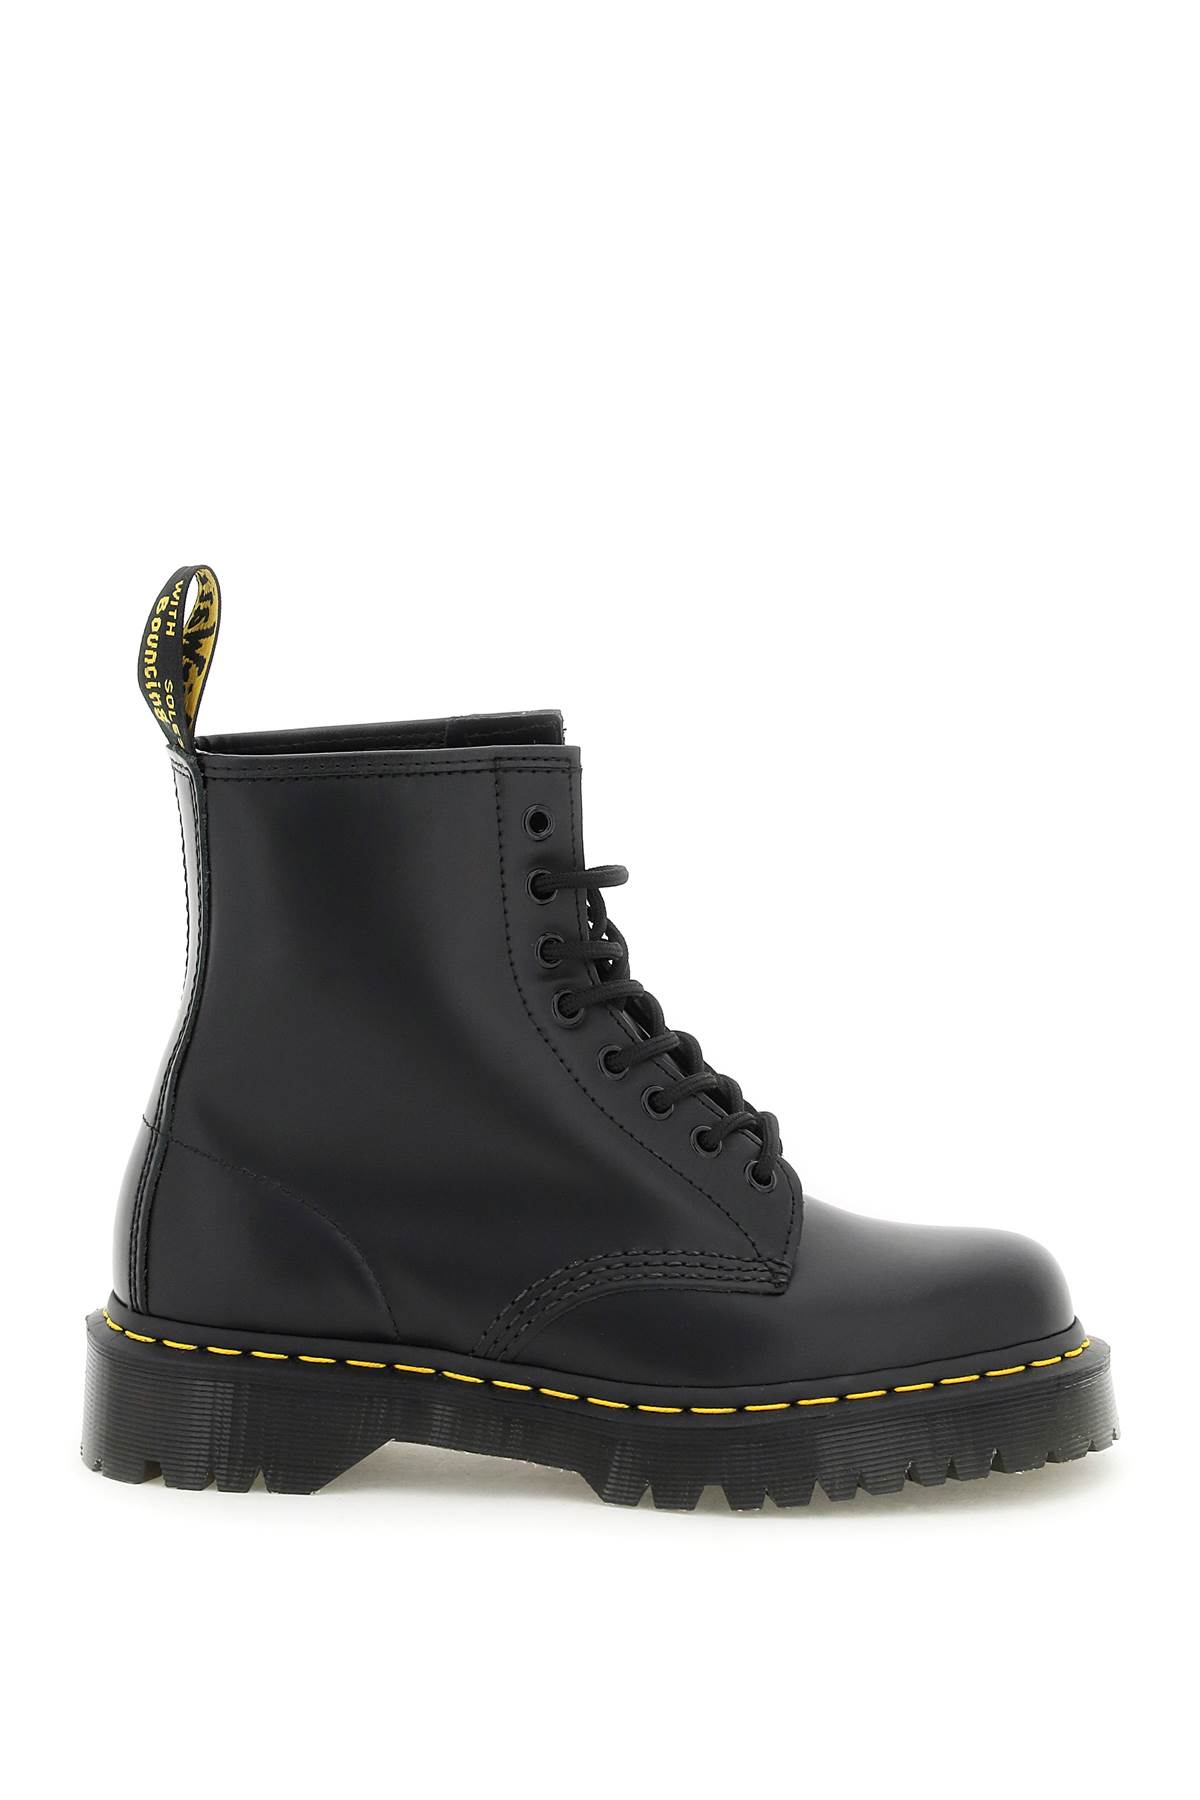 Dr. Martens 1460 Bex Smooth Lace-up Combat Boots